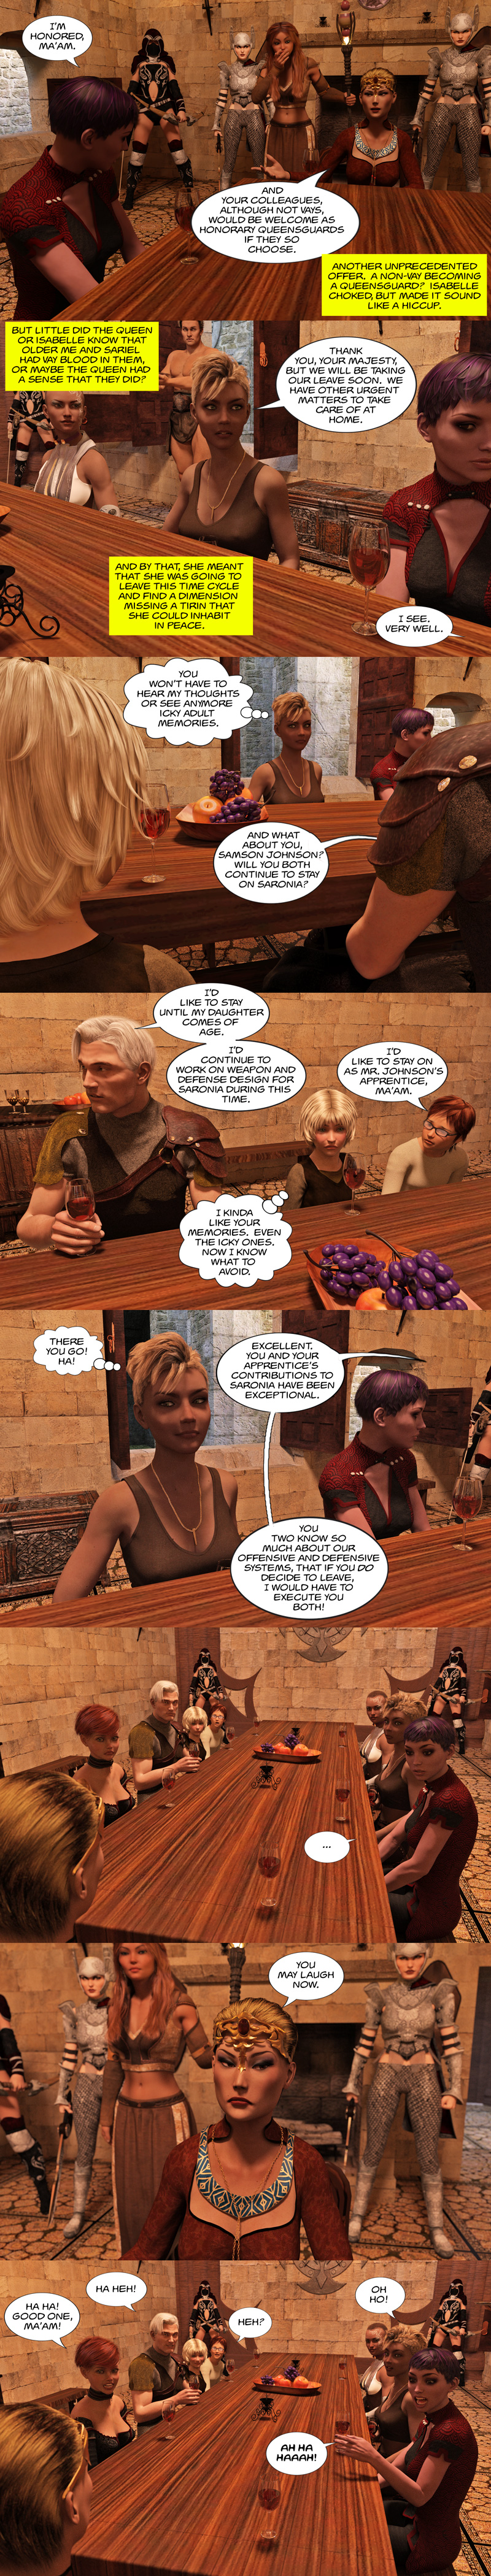 Chapter 17, page 10